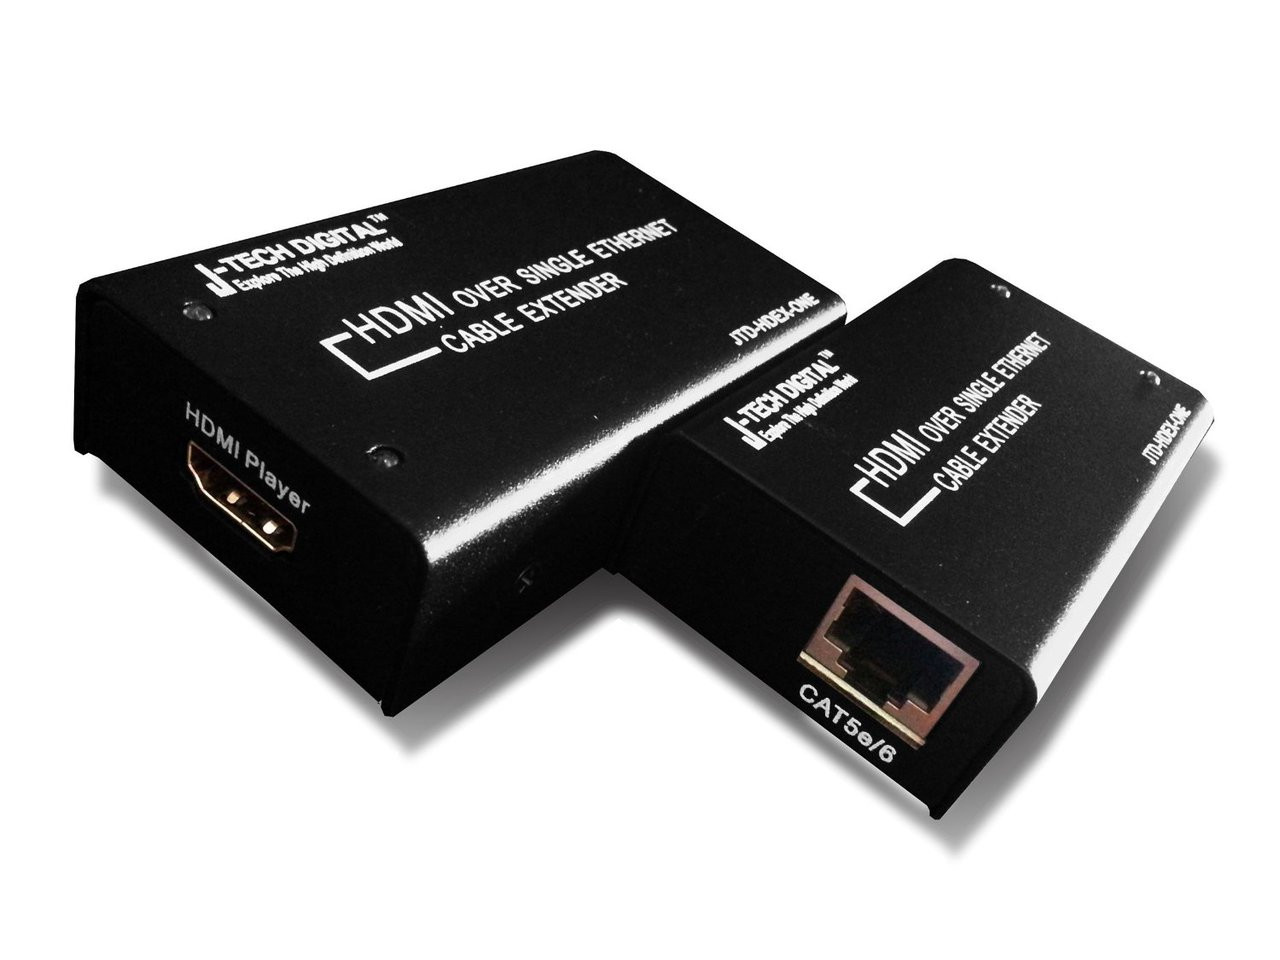 HDMI Extender Kit, support HDMI1.3v & 1.2 signal (10.2Gbps/deep color 36bit/xv-YCC/1080p24fs/dts-HD) for 200ft transmit via CAT5E/6/7 LAN cable.